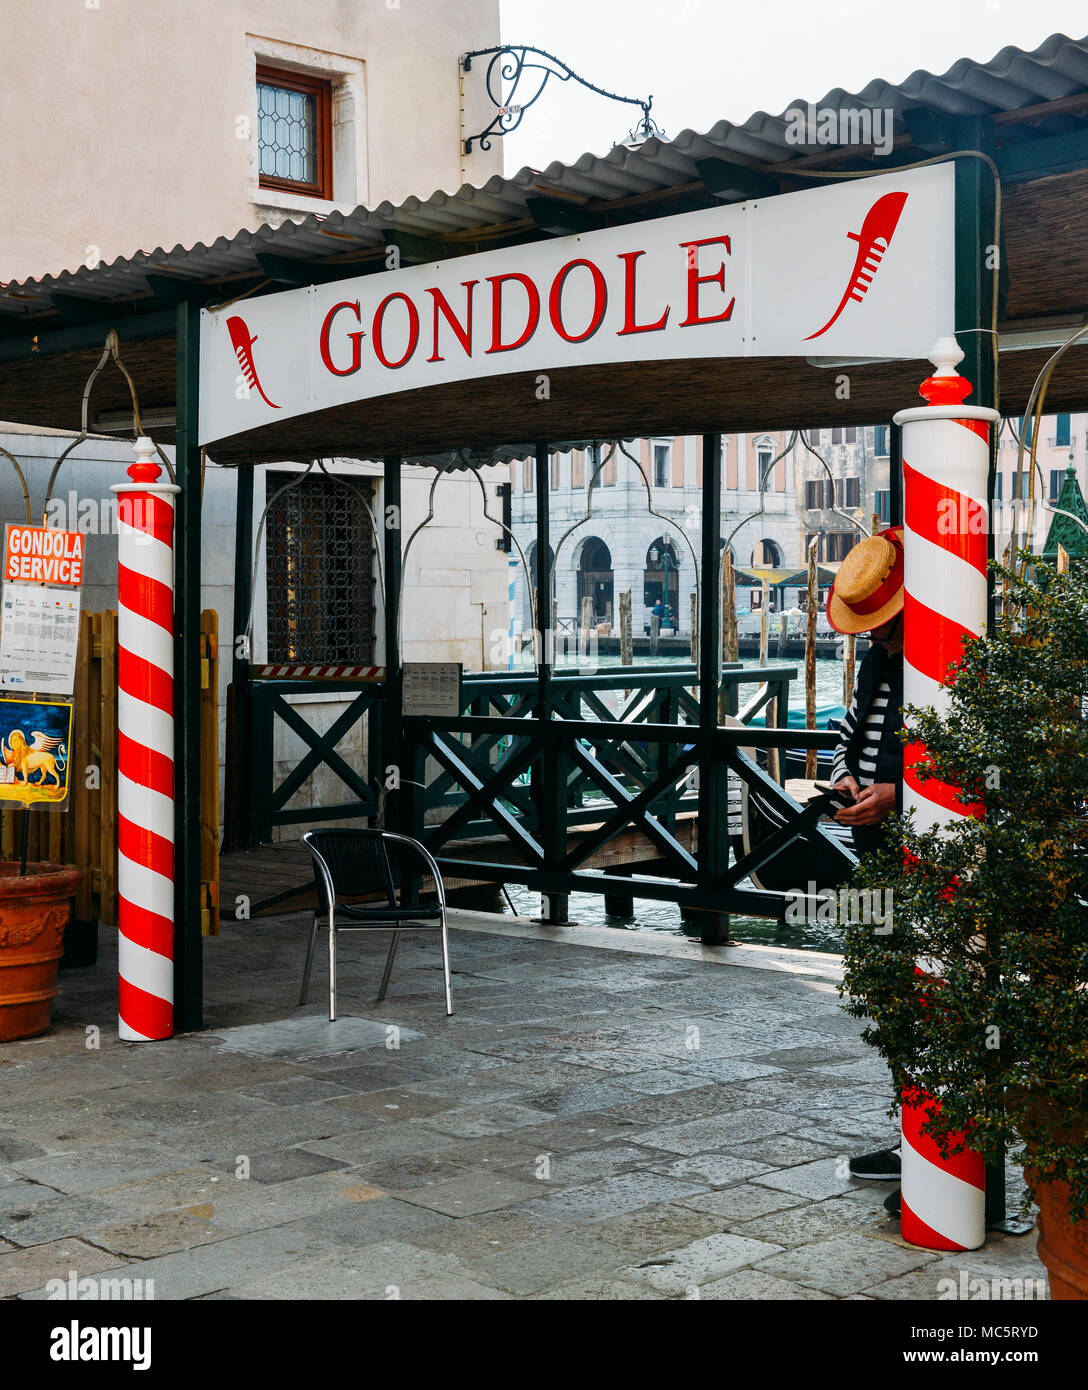 Venice, Italy - March 28th, 2018: Gondolier relaxes next to a sign advertising gondola riding Services Stock Photo